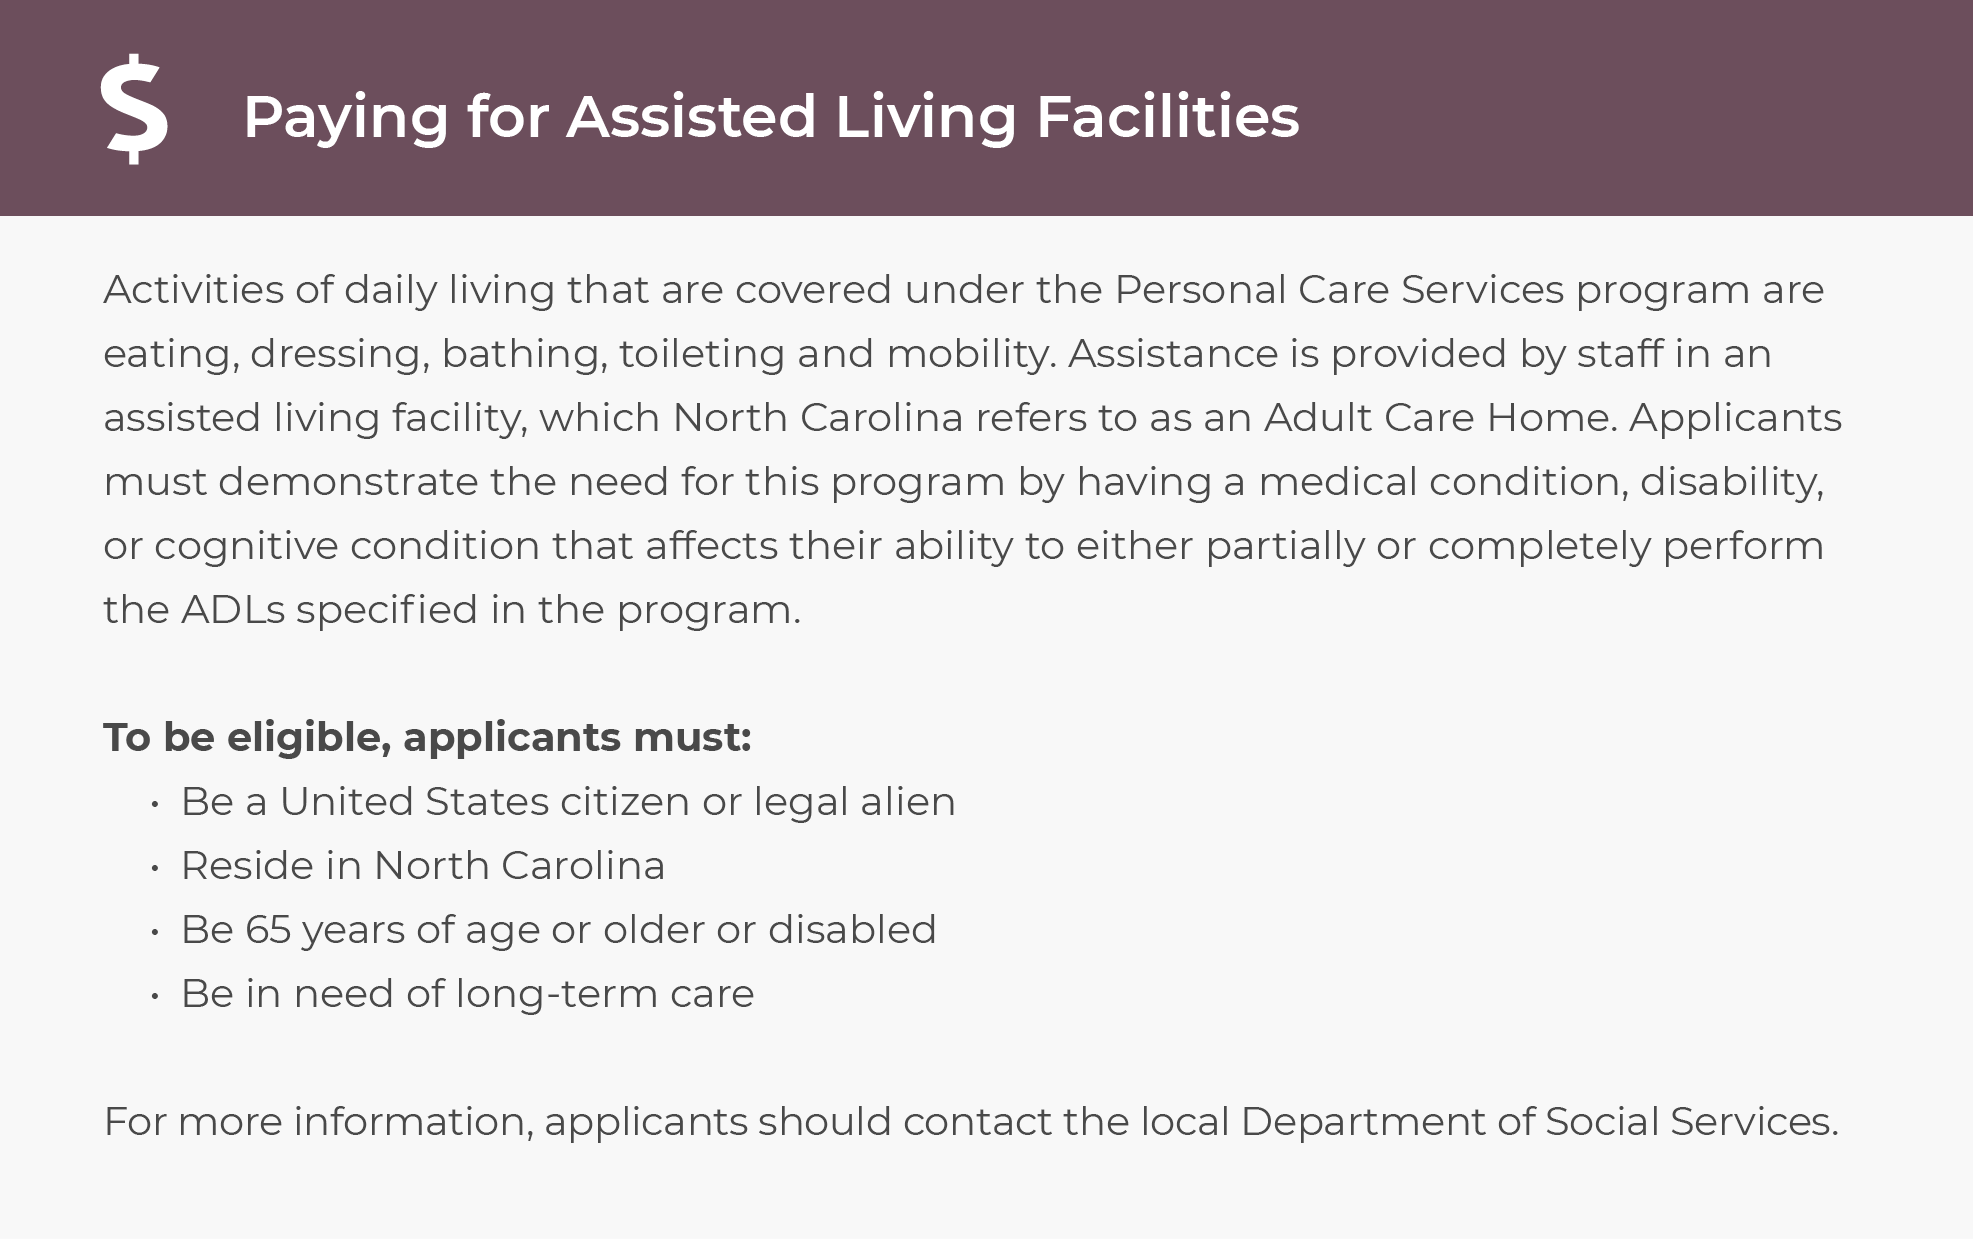 Paying for assisted living in North Carolina